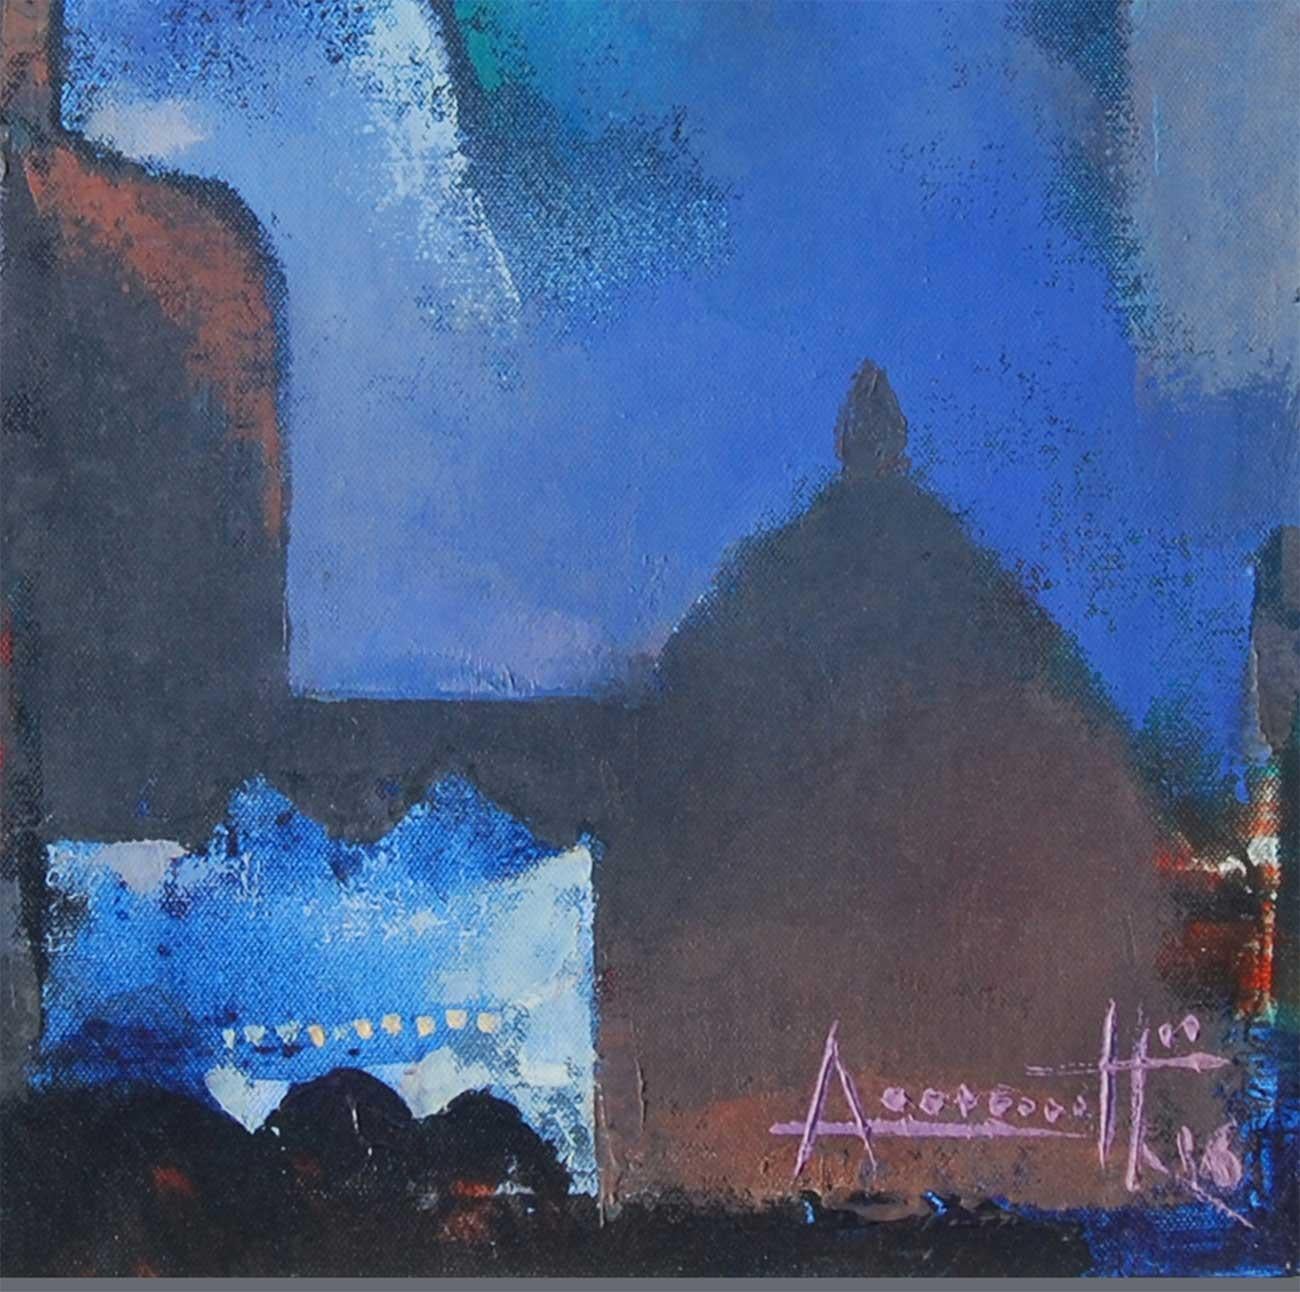 Somenath Maity     Structure     20 x 20 inches (unframed size)
Oilc on canvas
Inclusive of shipment in a roll form.

About the Artist and his work :
Born : 1960 - Midnapore, West Bengal.

Education :
• 1980-85 Diploma in Fine Arts, Indian College